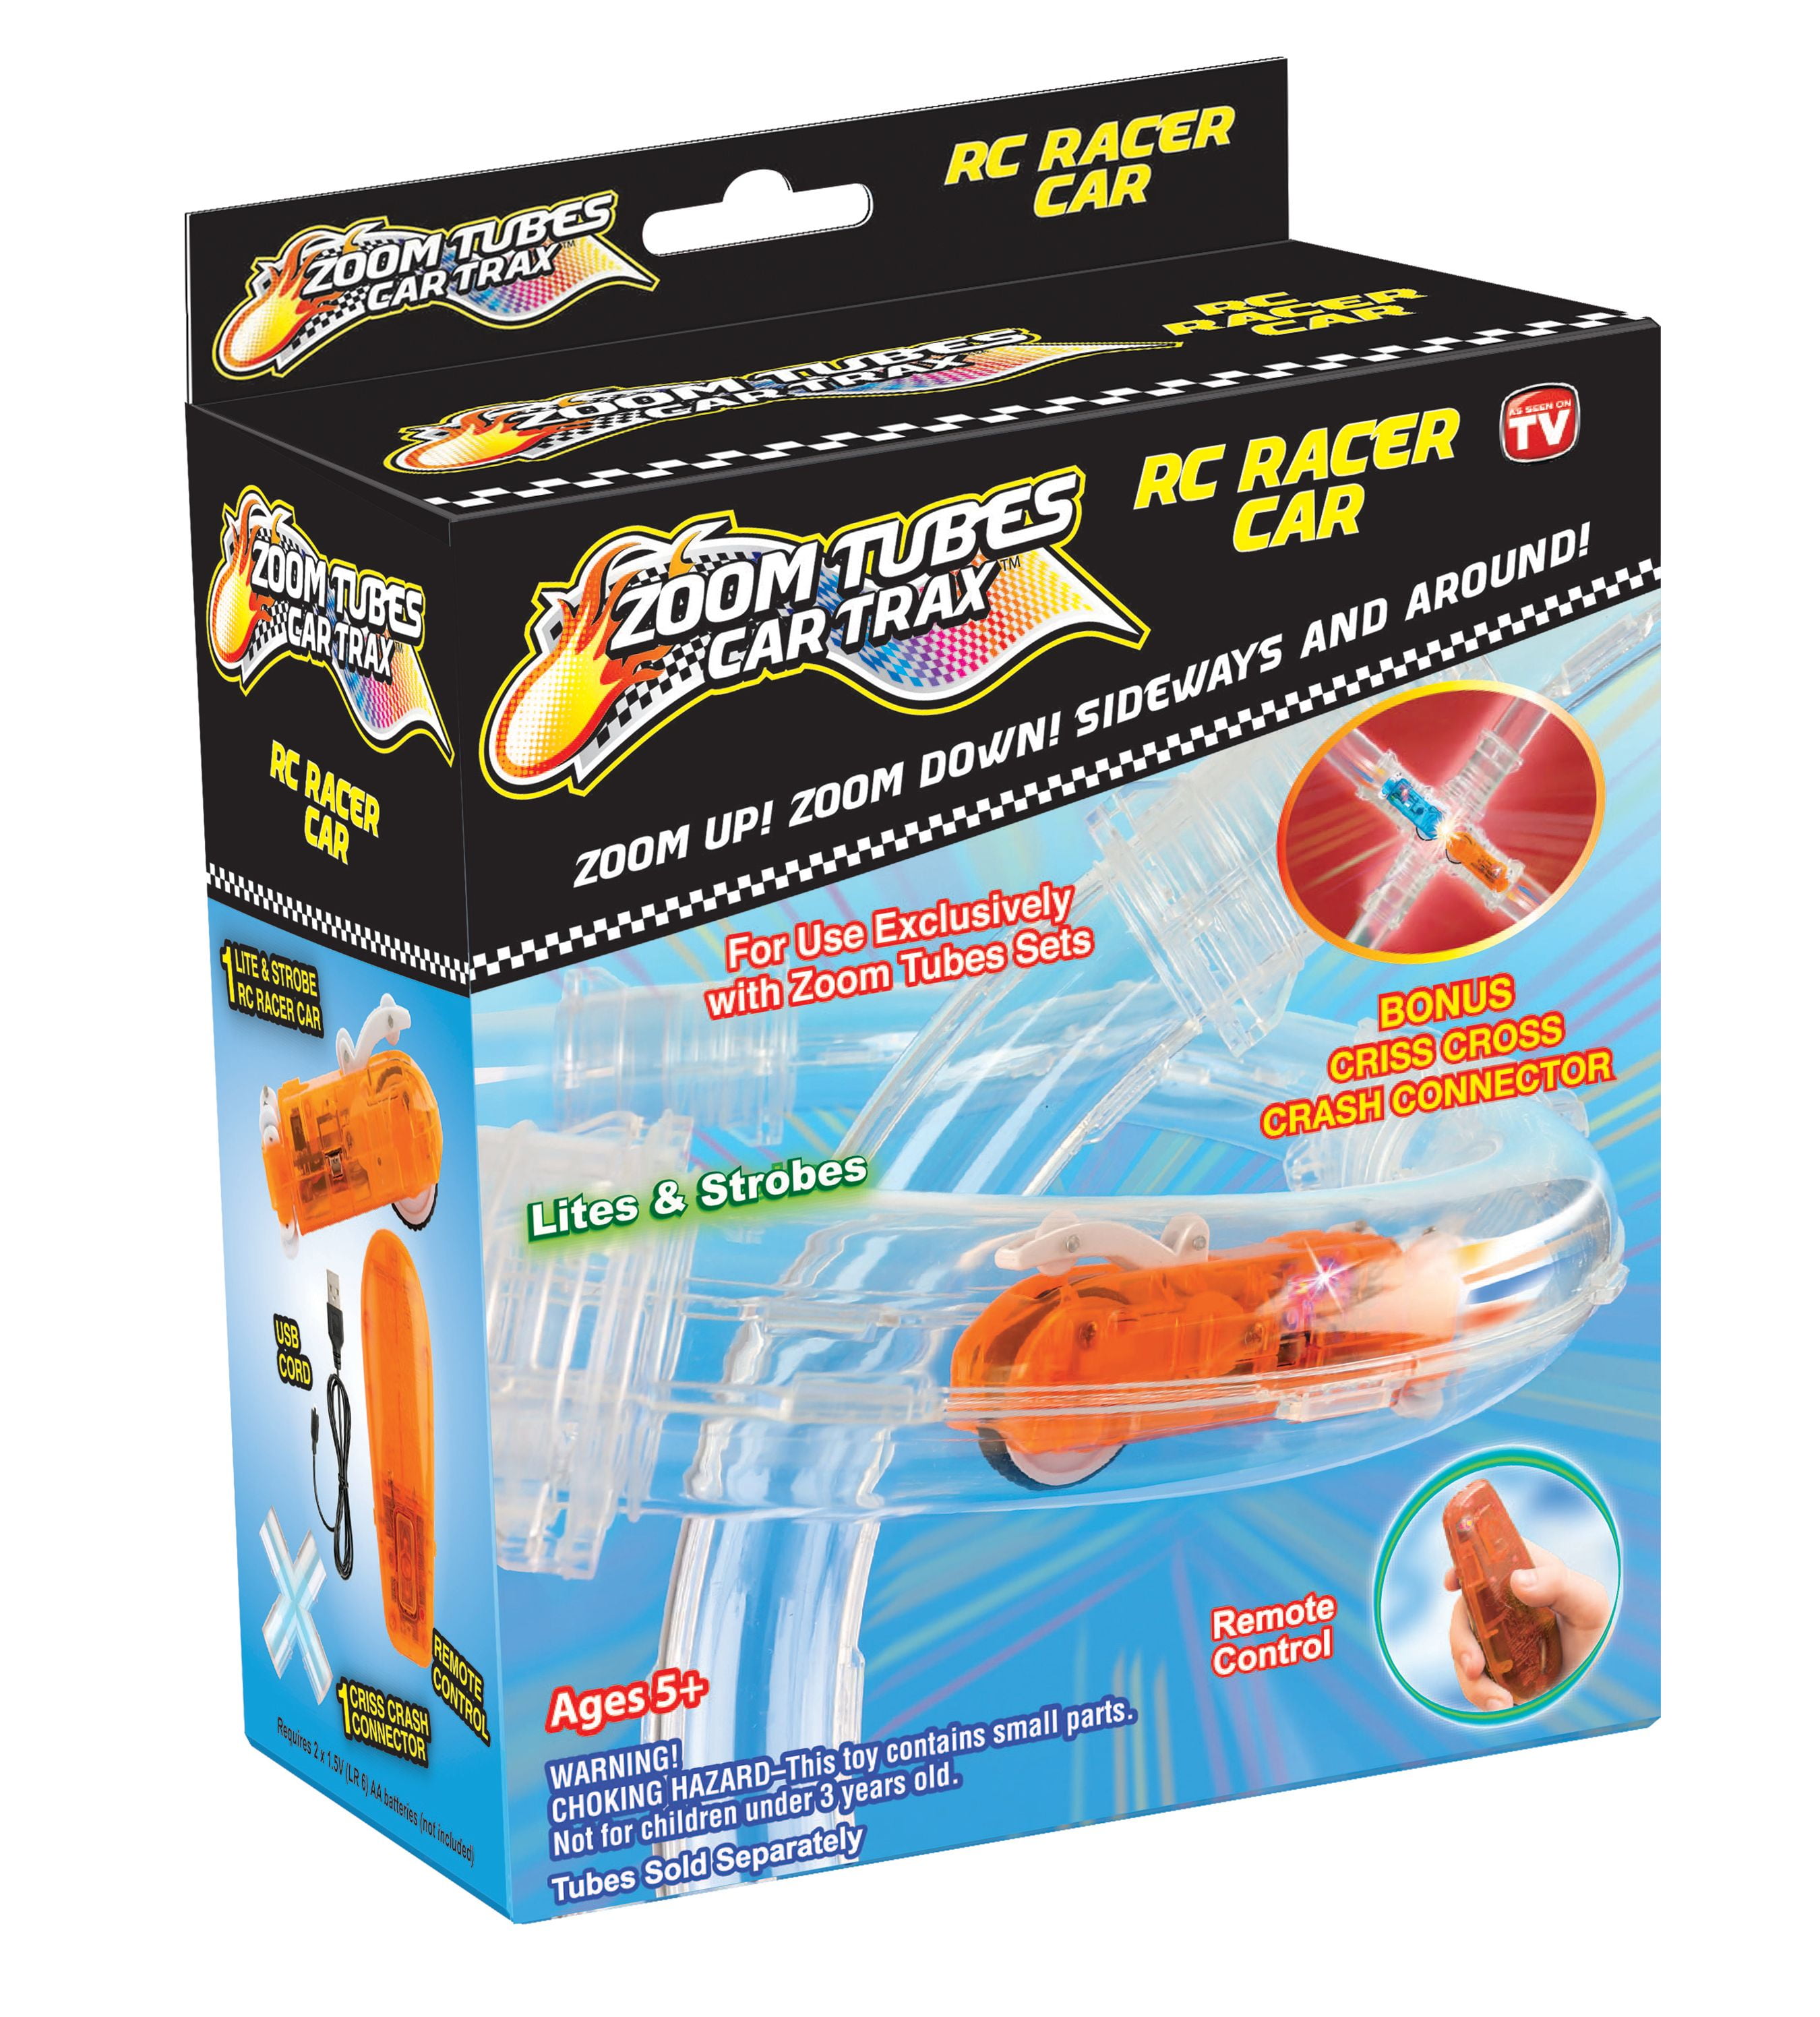 ZOOM TUBES CAR TRAX Racer Pack RC Orange Car As Seen on TV NEW 